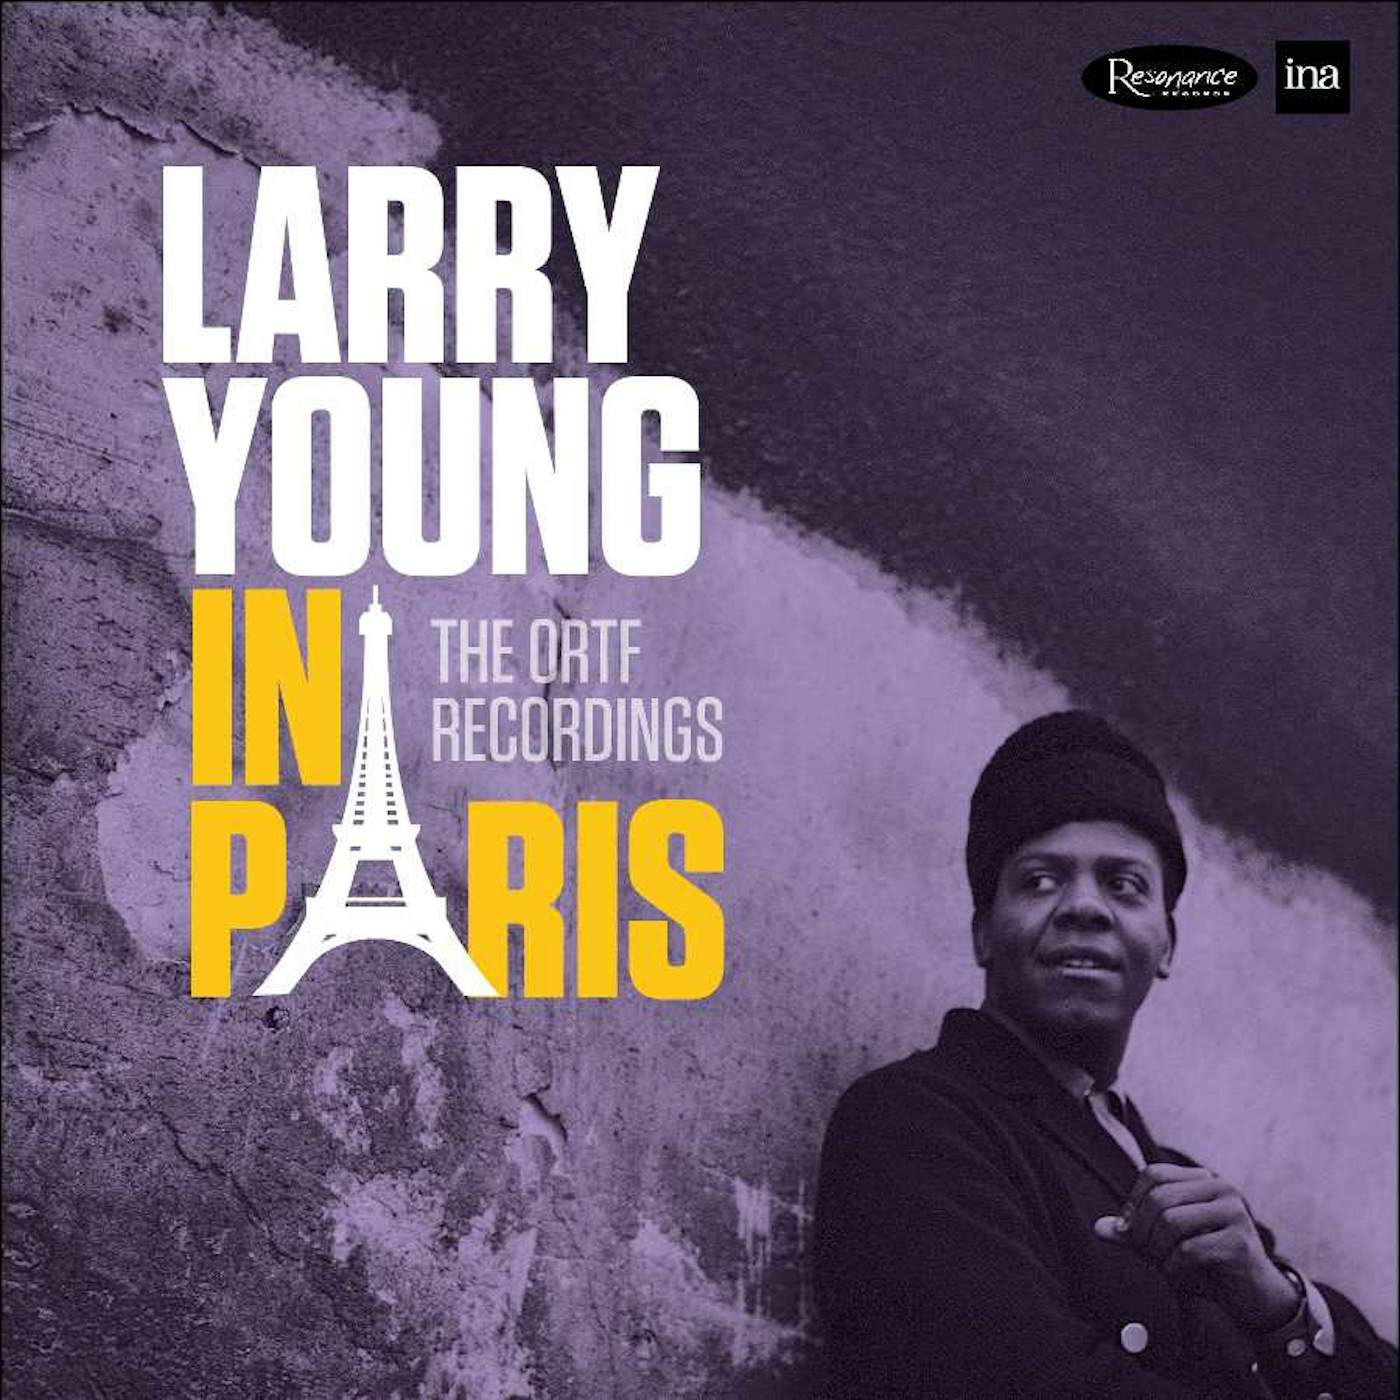 Larry Young In Paris: The ORTF Recordings Vinyl Record